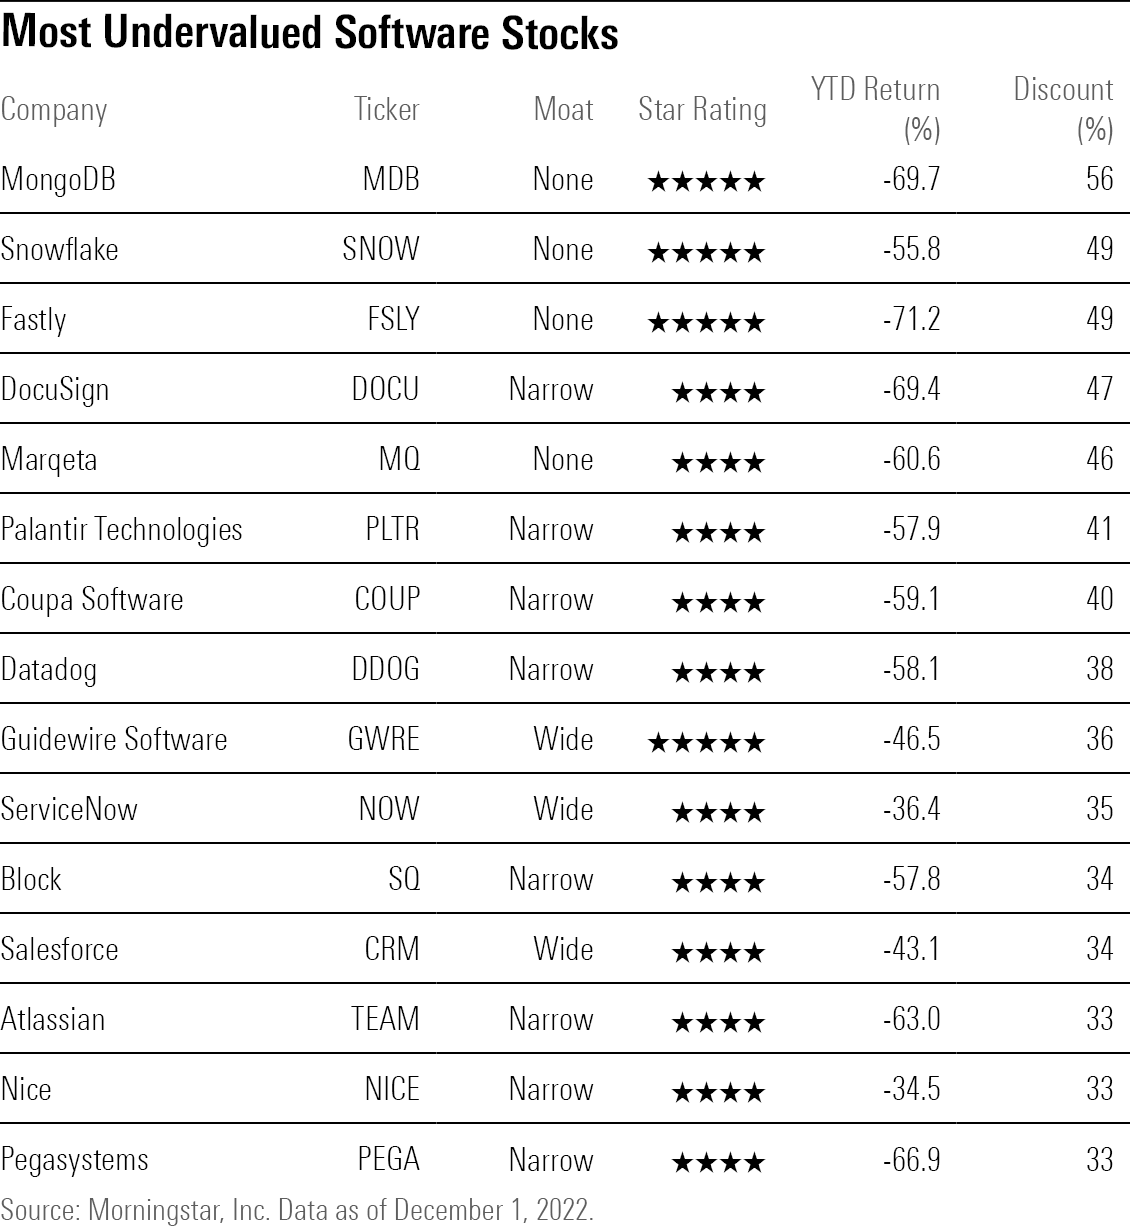 A table showing the 15 most undervalued software stocks as of Dec. 1, 2022.